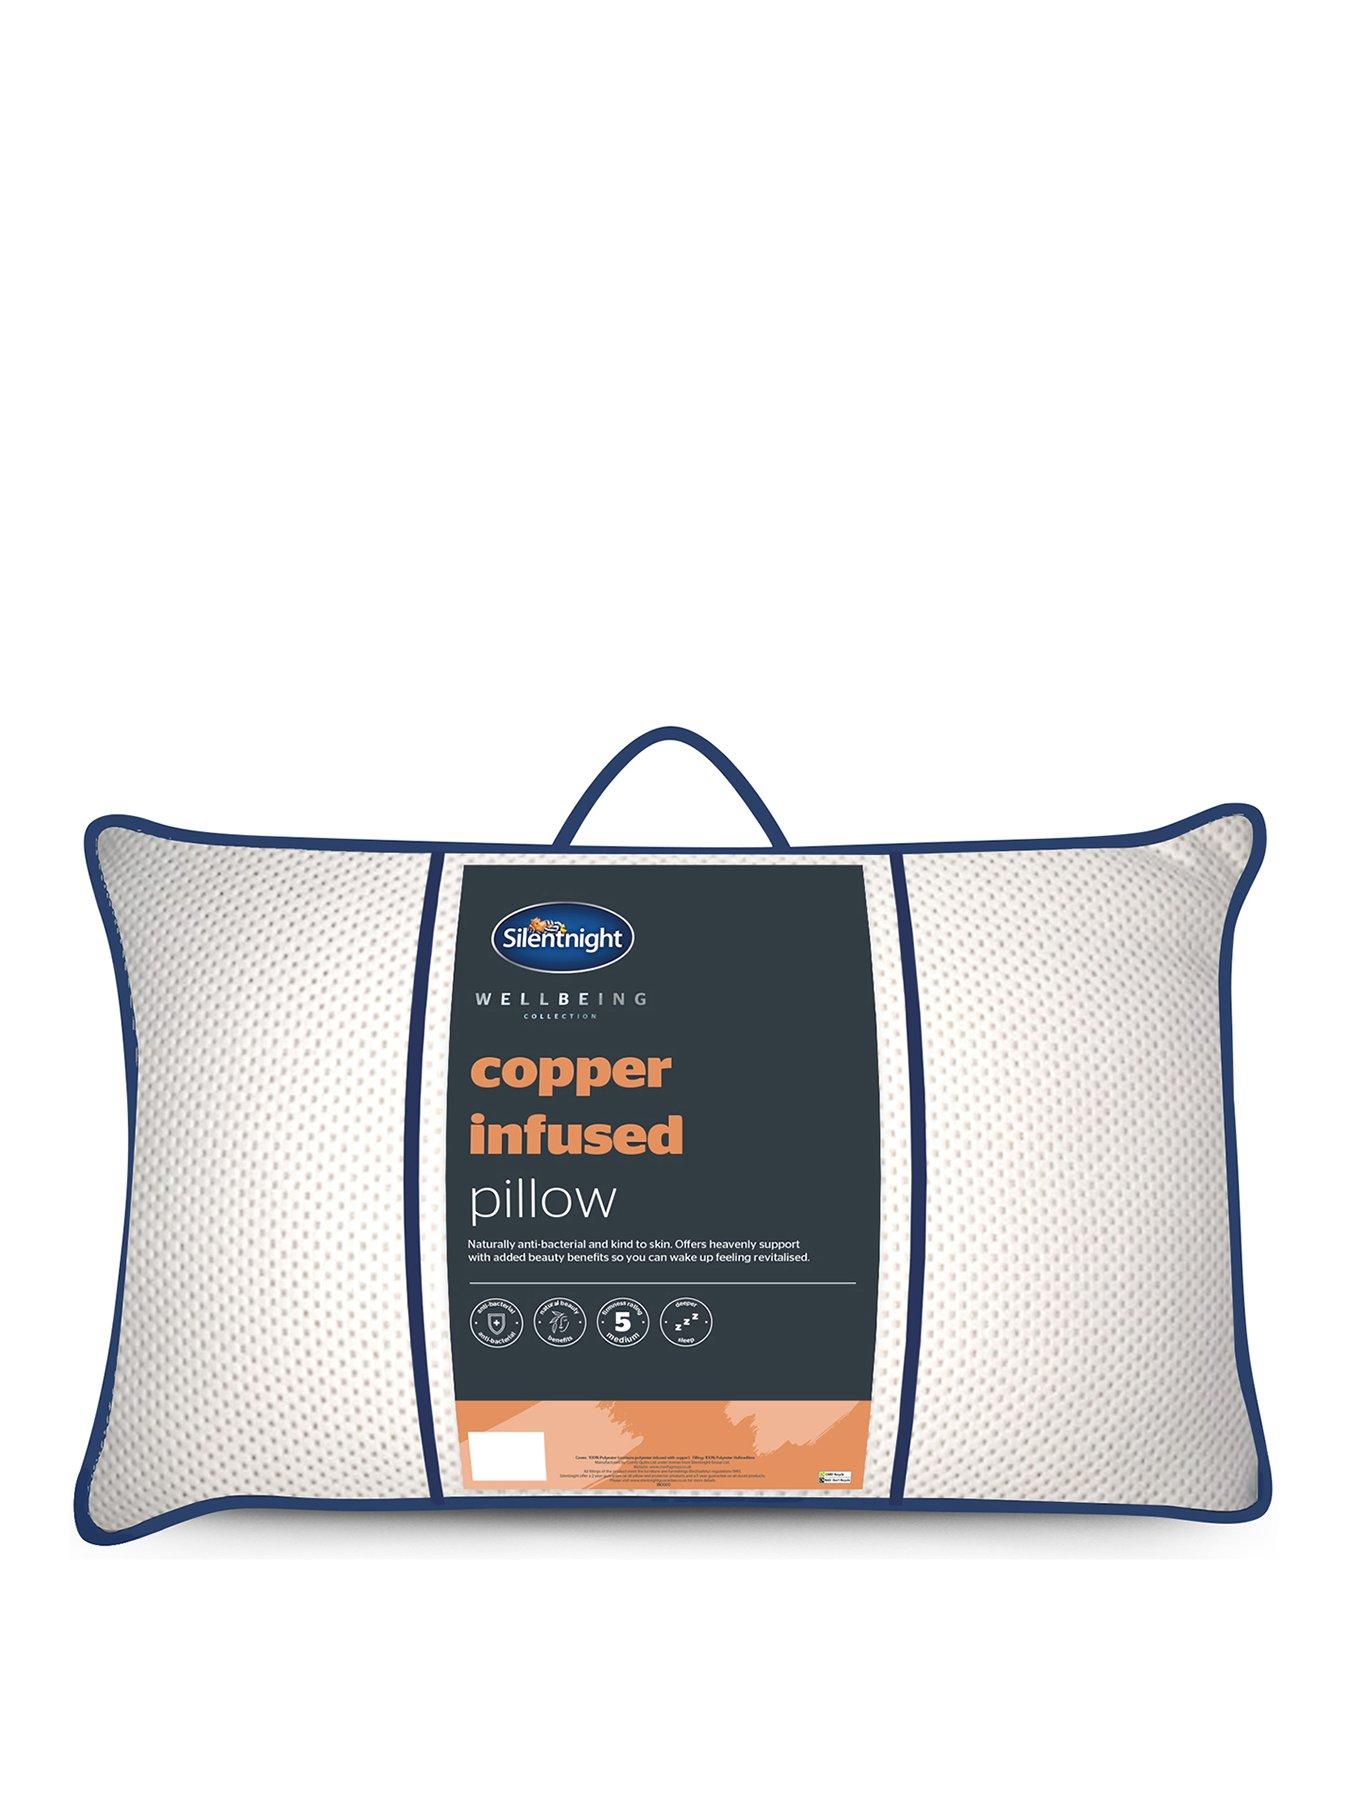 Wellbeing 30% Copper Infused Pillow